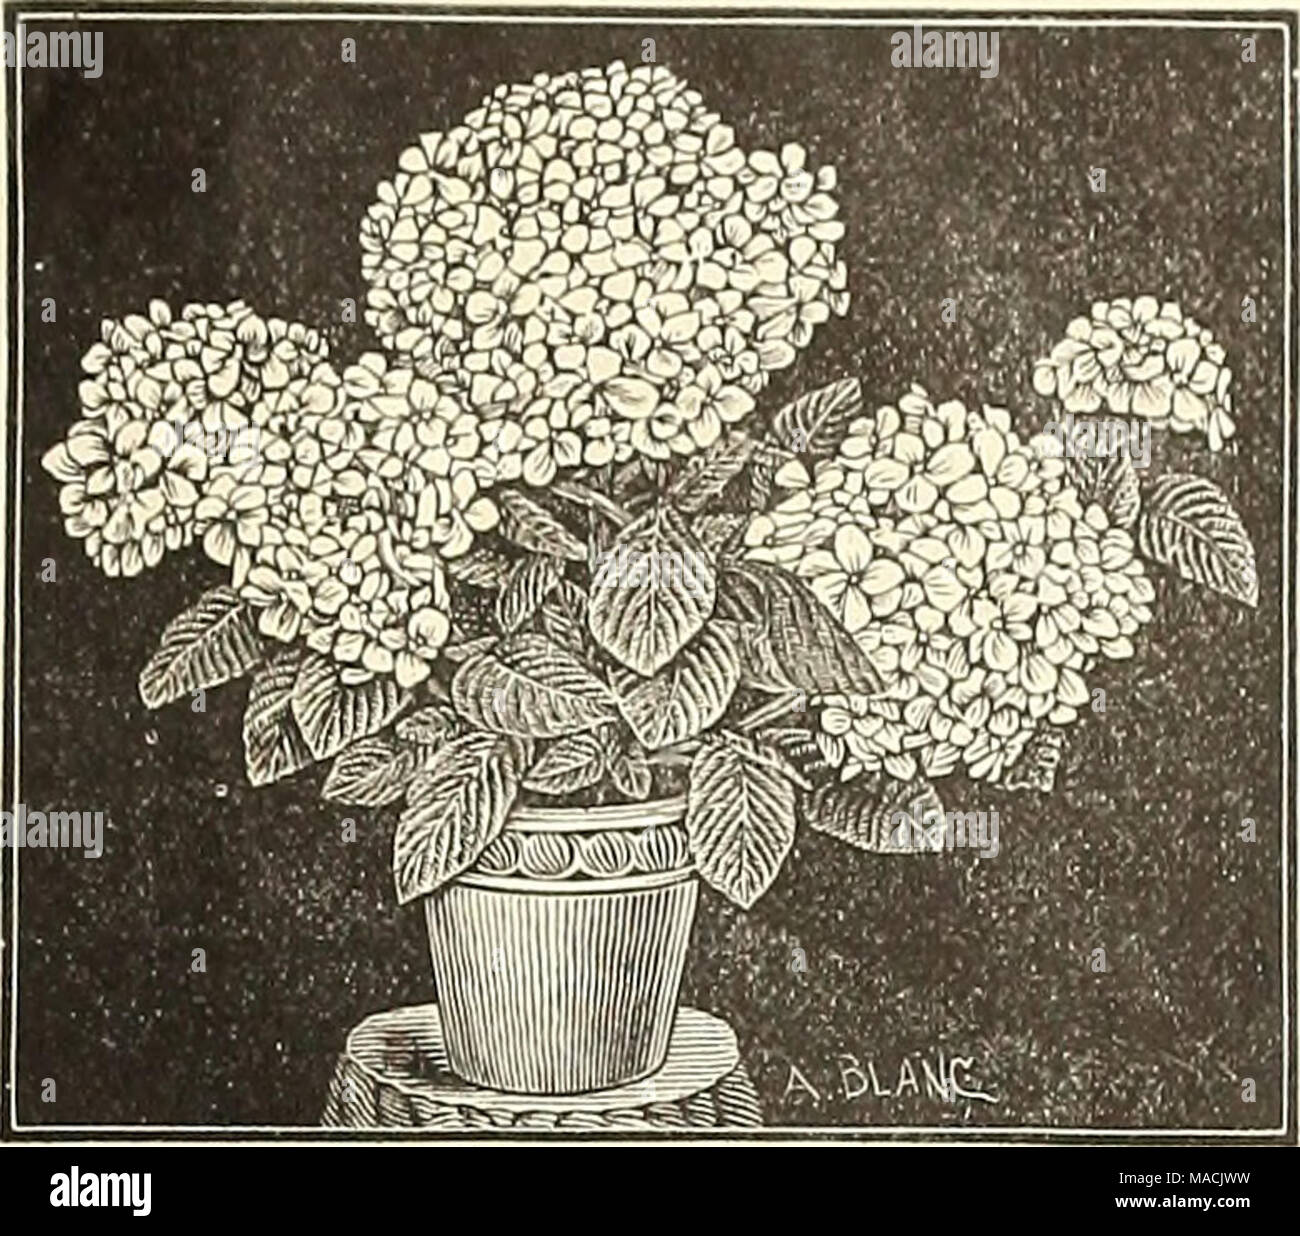 . Dreer's wholesale price list for florists and market gardeners : summer edition July 1891 August . Hydrangeas. Inch pot3. Per doz. Per 100 Otaksa 3 1 00 8 00 Thos. Hogg 3 1 00 7 00 &quot; 4 1 50 12 00 Rosea 3 1 50 12 00 White Fringed 3 1 50 12 00 Lapagerias. Lapageria Rosea. We have a fine stock of this suherh climber. Strong plants, 5 inch pots, $2.50 each. &quot; &quot; 6 &quot; &quot; 3.50 &quot; Lapageria Alba. Good plants, 5 iu. pots, $4.00 each. Maranta Ornata. A useful compact growing variety not exceeding 6 inches in height suitahle for planting in fern dishes in connection with Fern Stock Photo